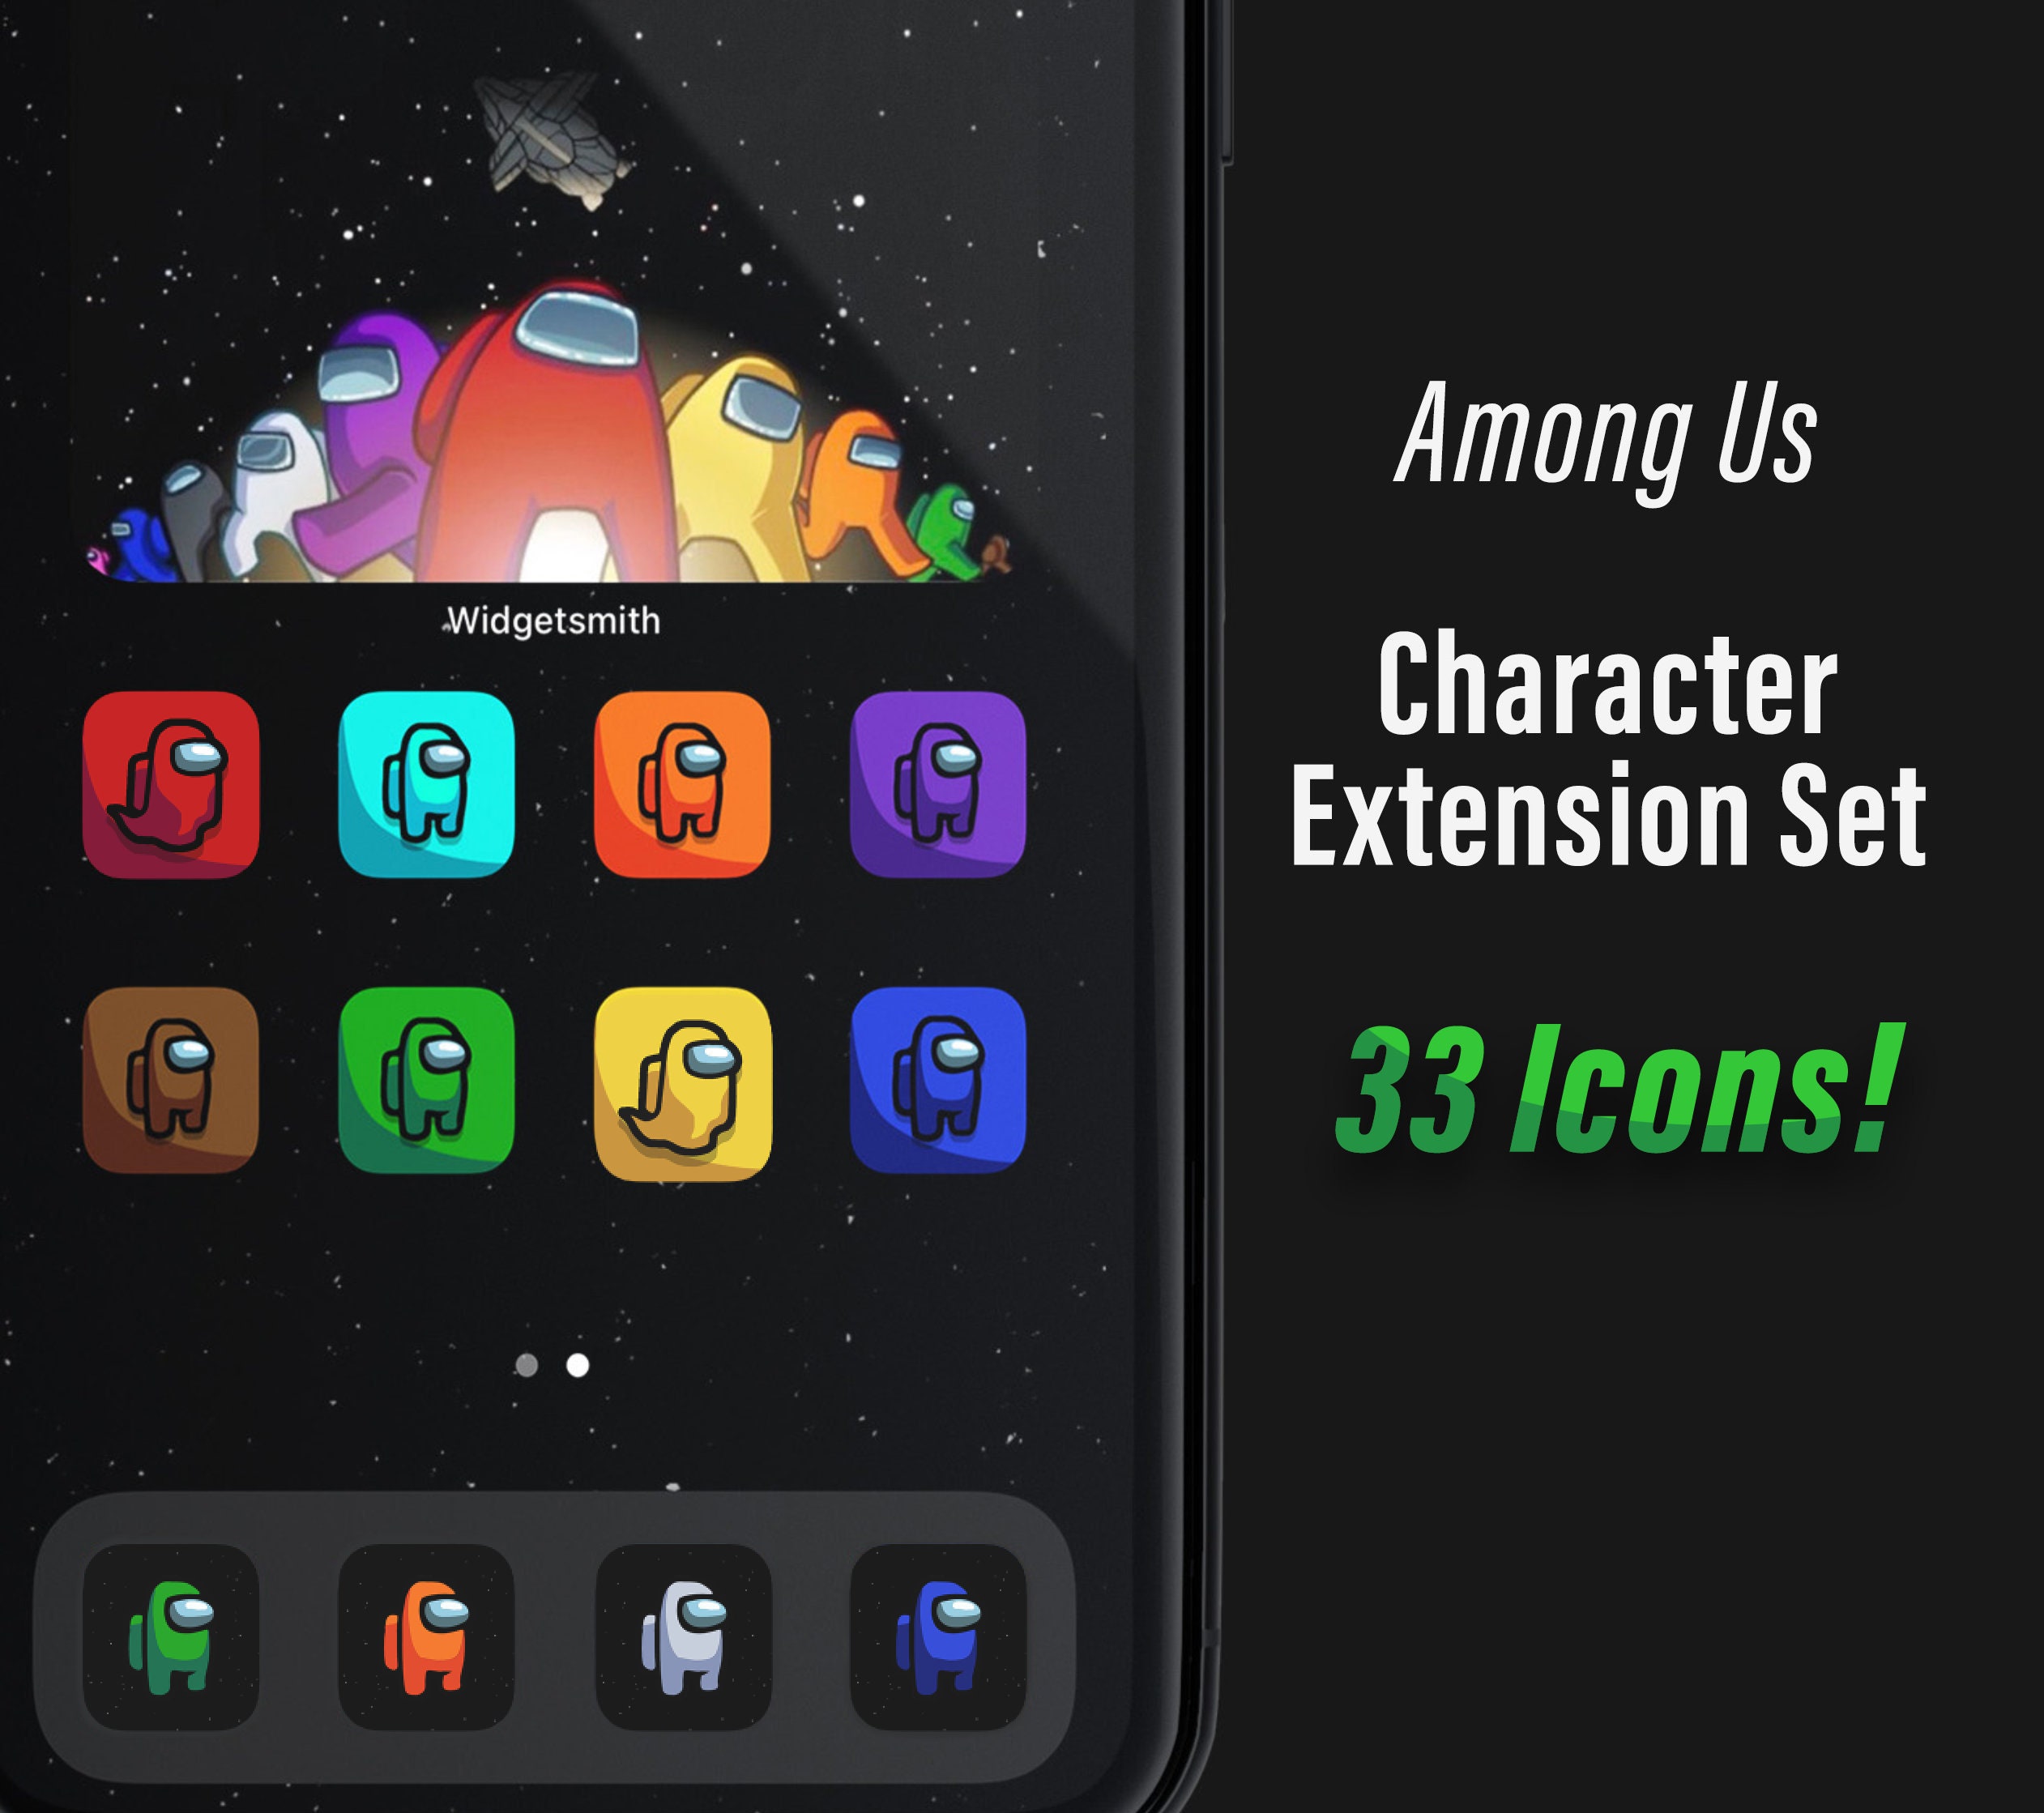 Among Us: Download the Icon Set Inspired by the Game